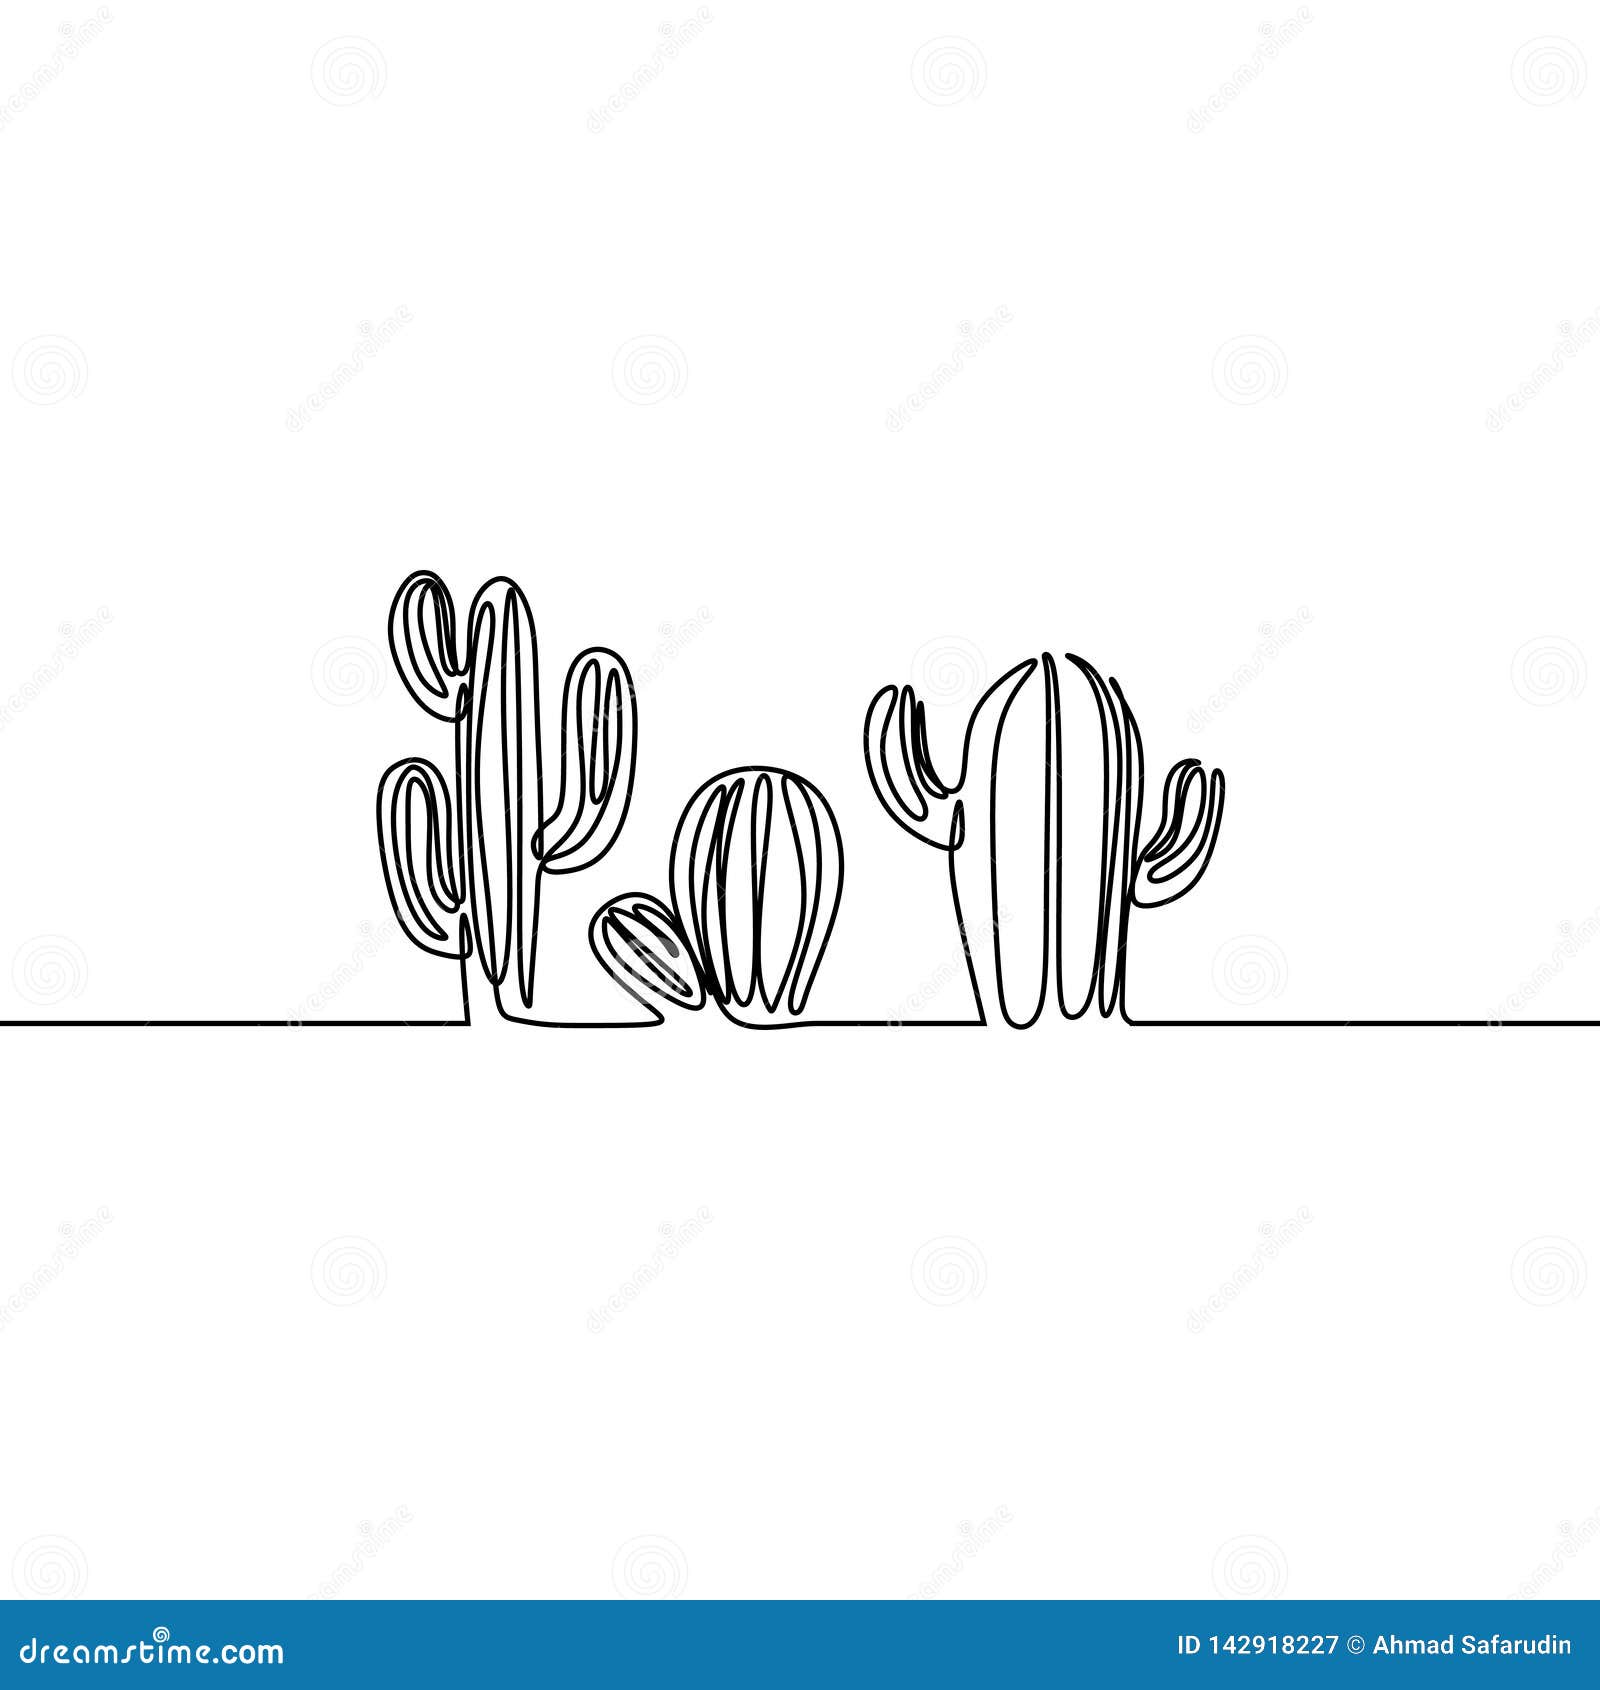 Continuous Line Drawing Of Vector Set Of Cute Cactus Black And White Sketch House Plants Isolated On White Background Potted Stock Vector Illustration Of Line Plant 142918227